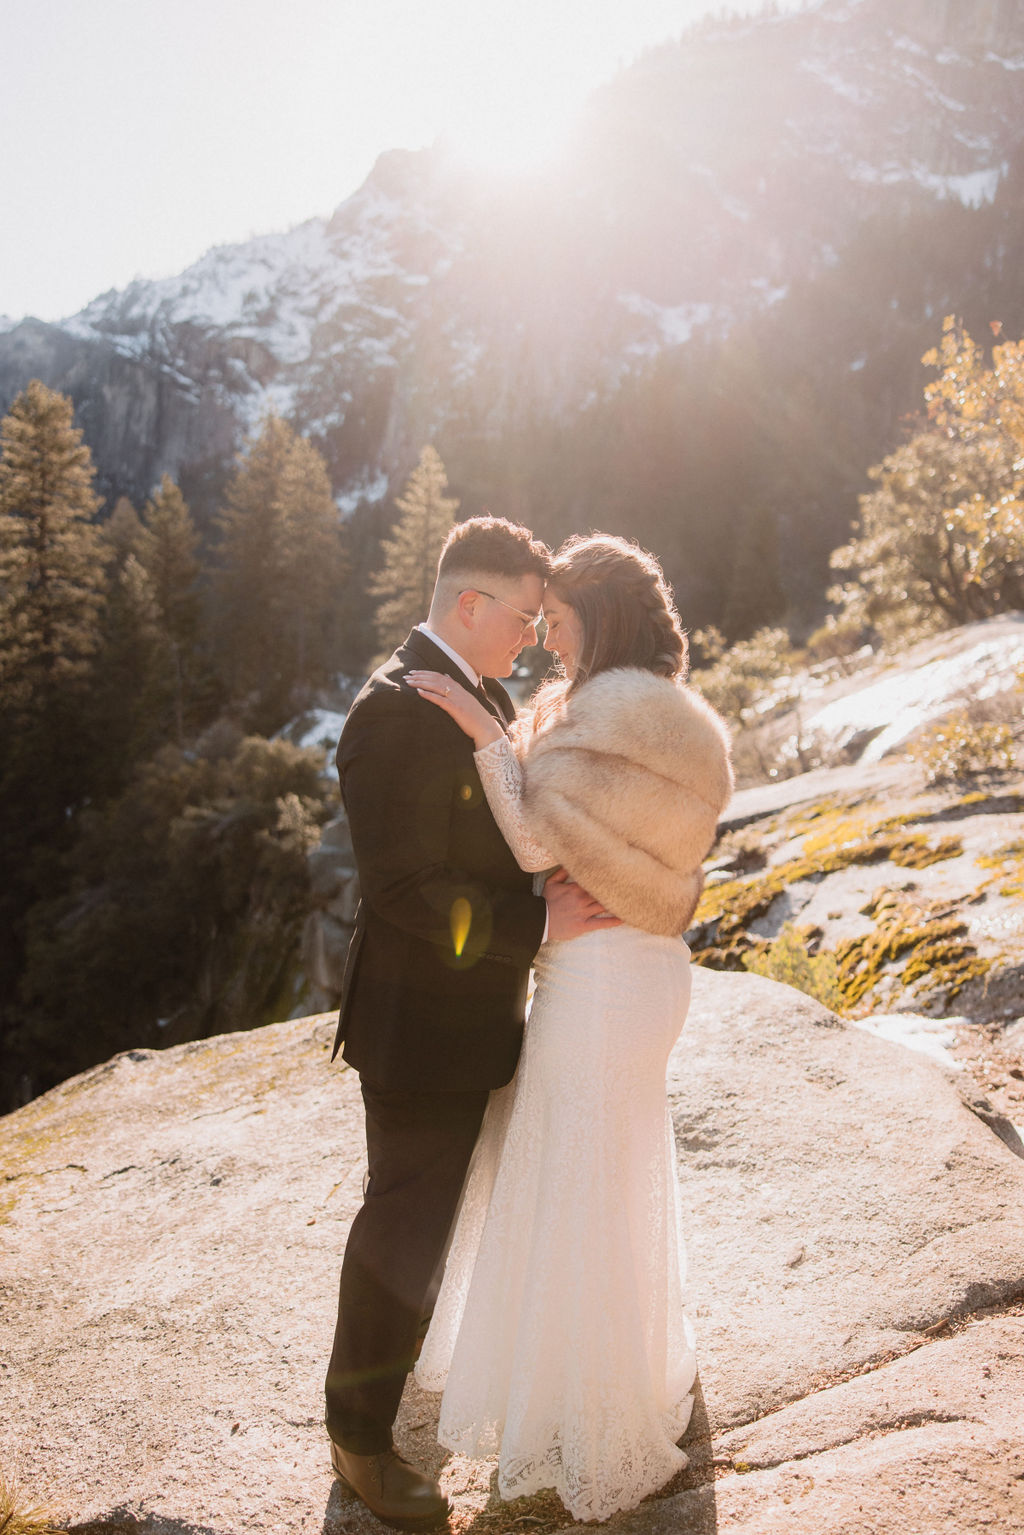 A couple in wedding attire dancing on a mountain overlook with scenic cliffs in the background.